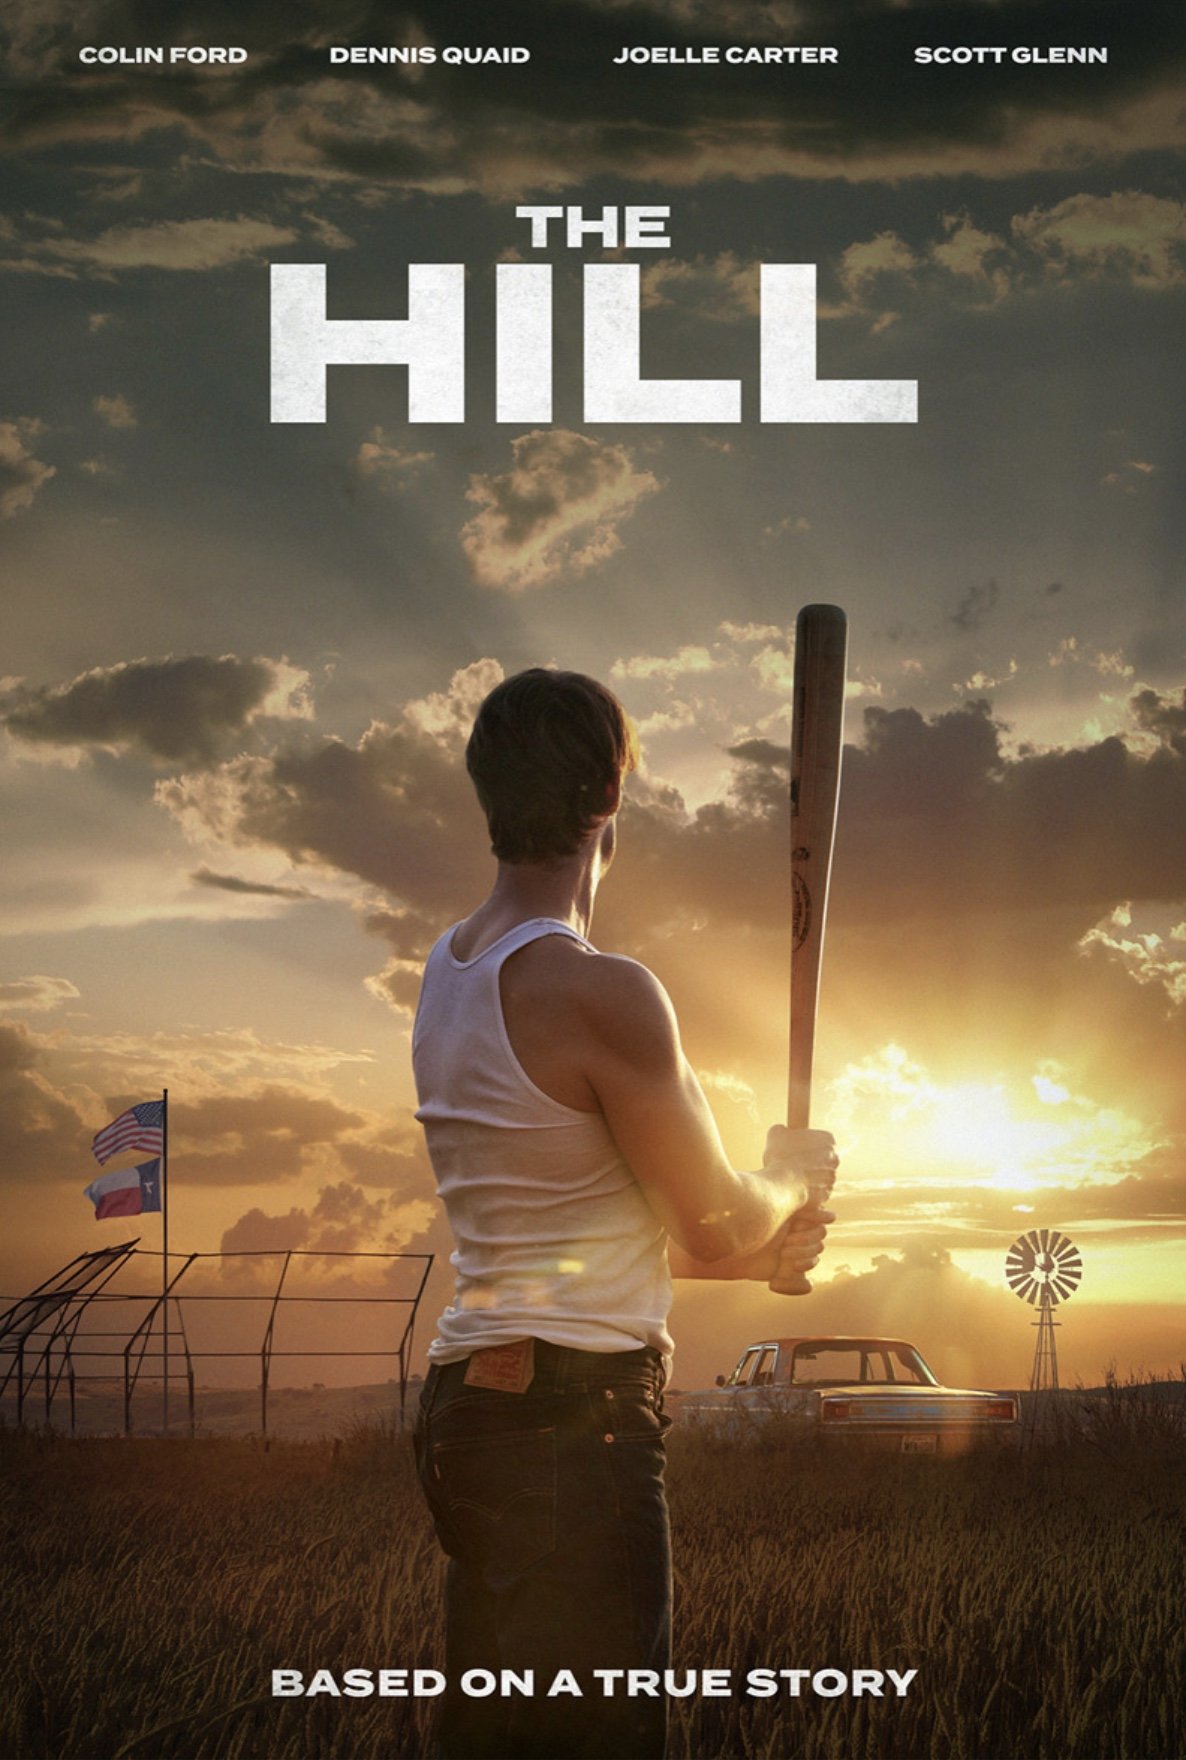 Trailer for New Baseball Biopic Film THE HILL Starring Dennis Quaid and